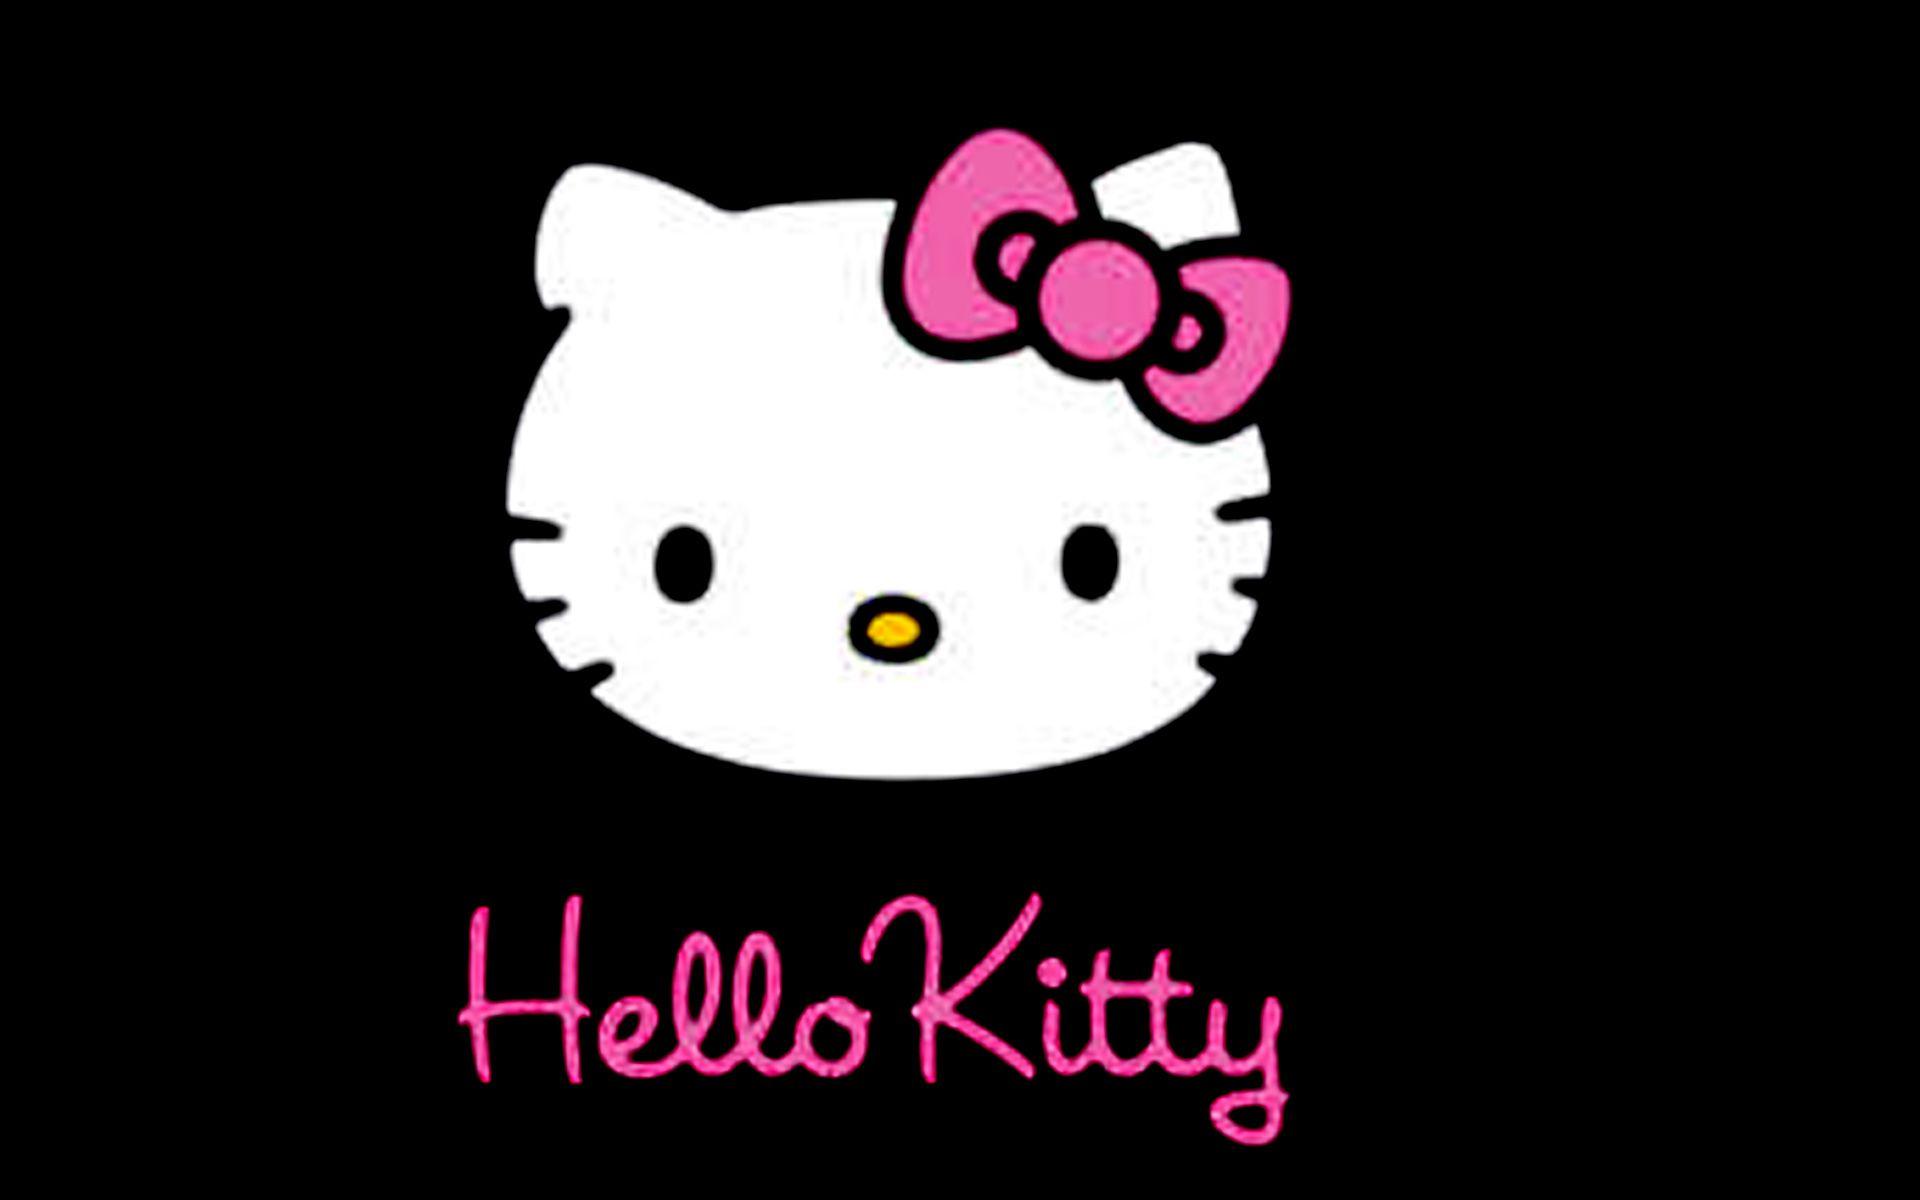 Make today Amazing Wallpaper 4K, Hello kitty quotes